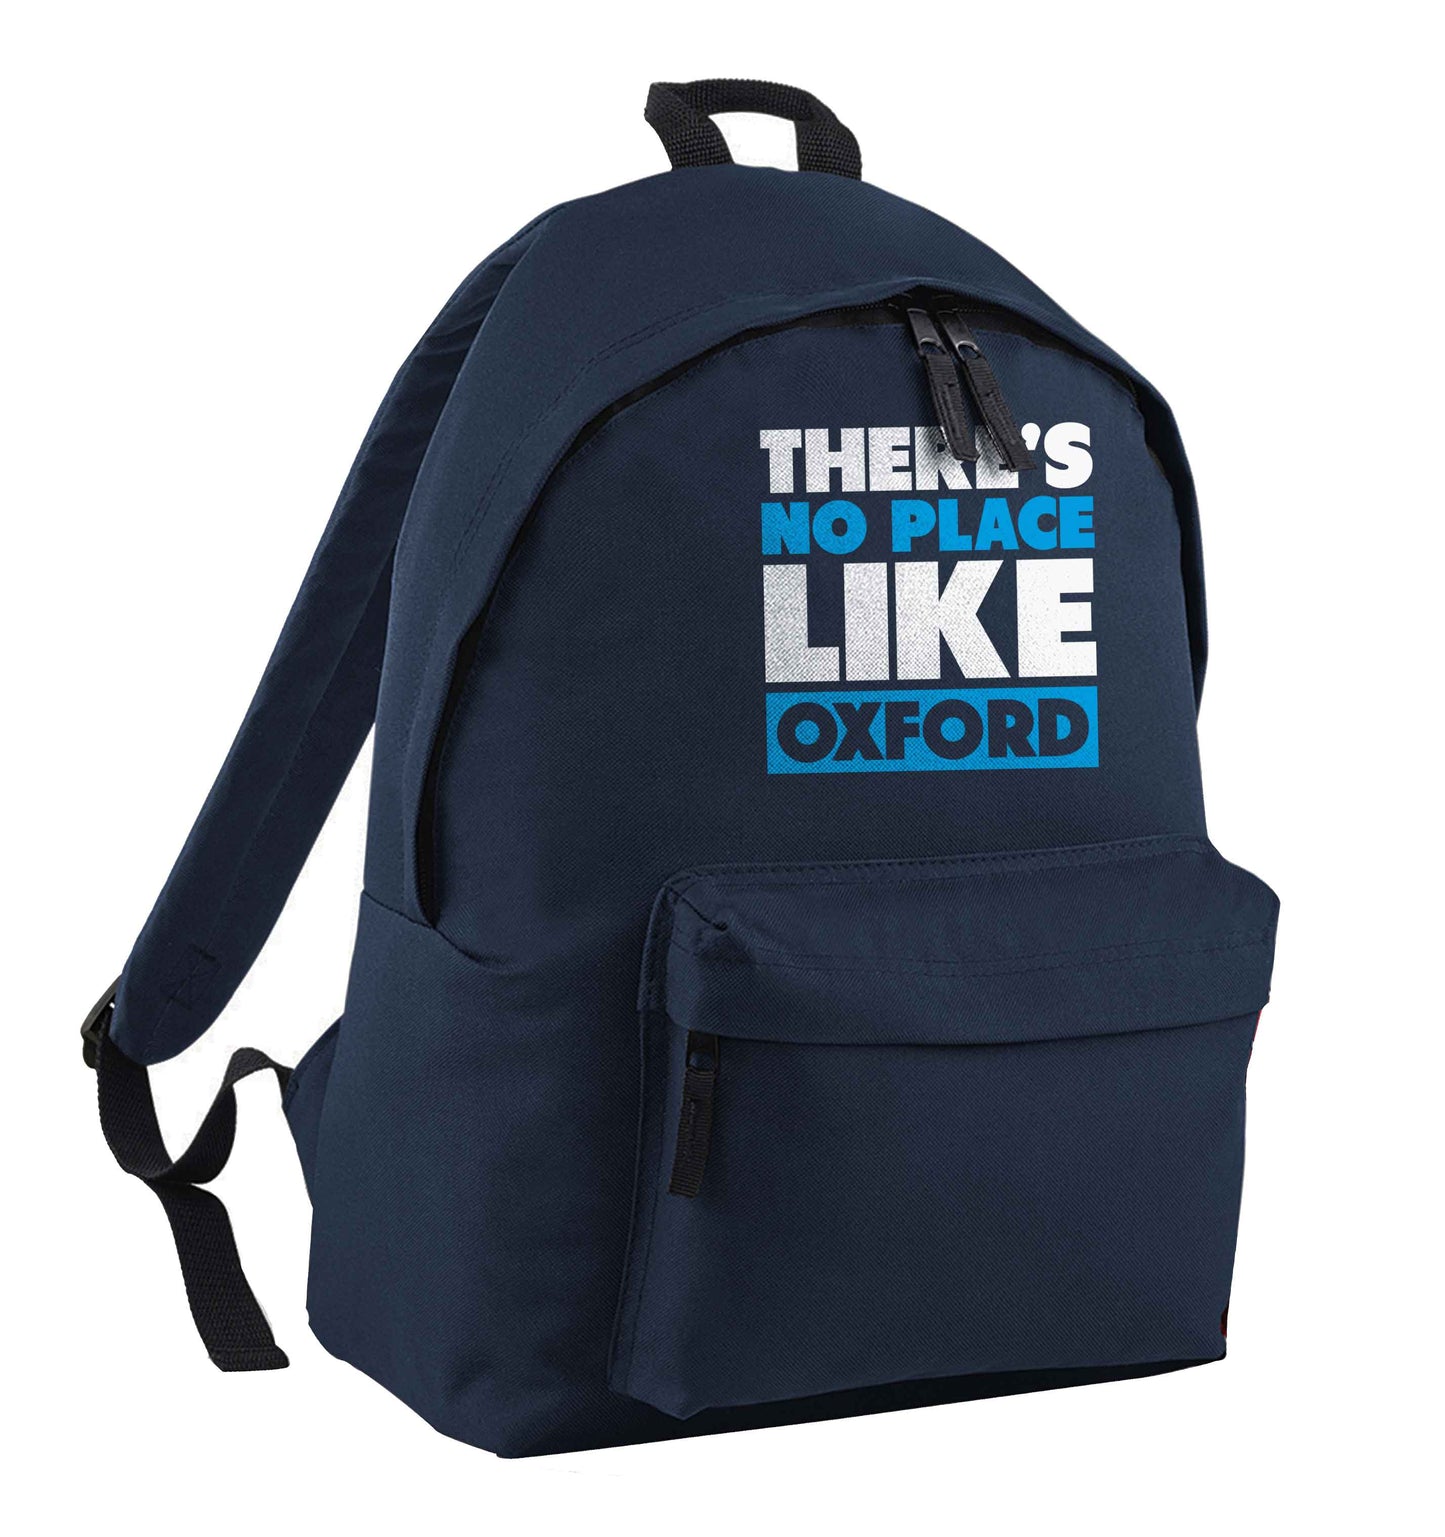 There's no place like Oxford navy adults backpack